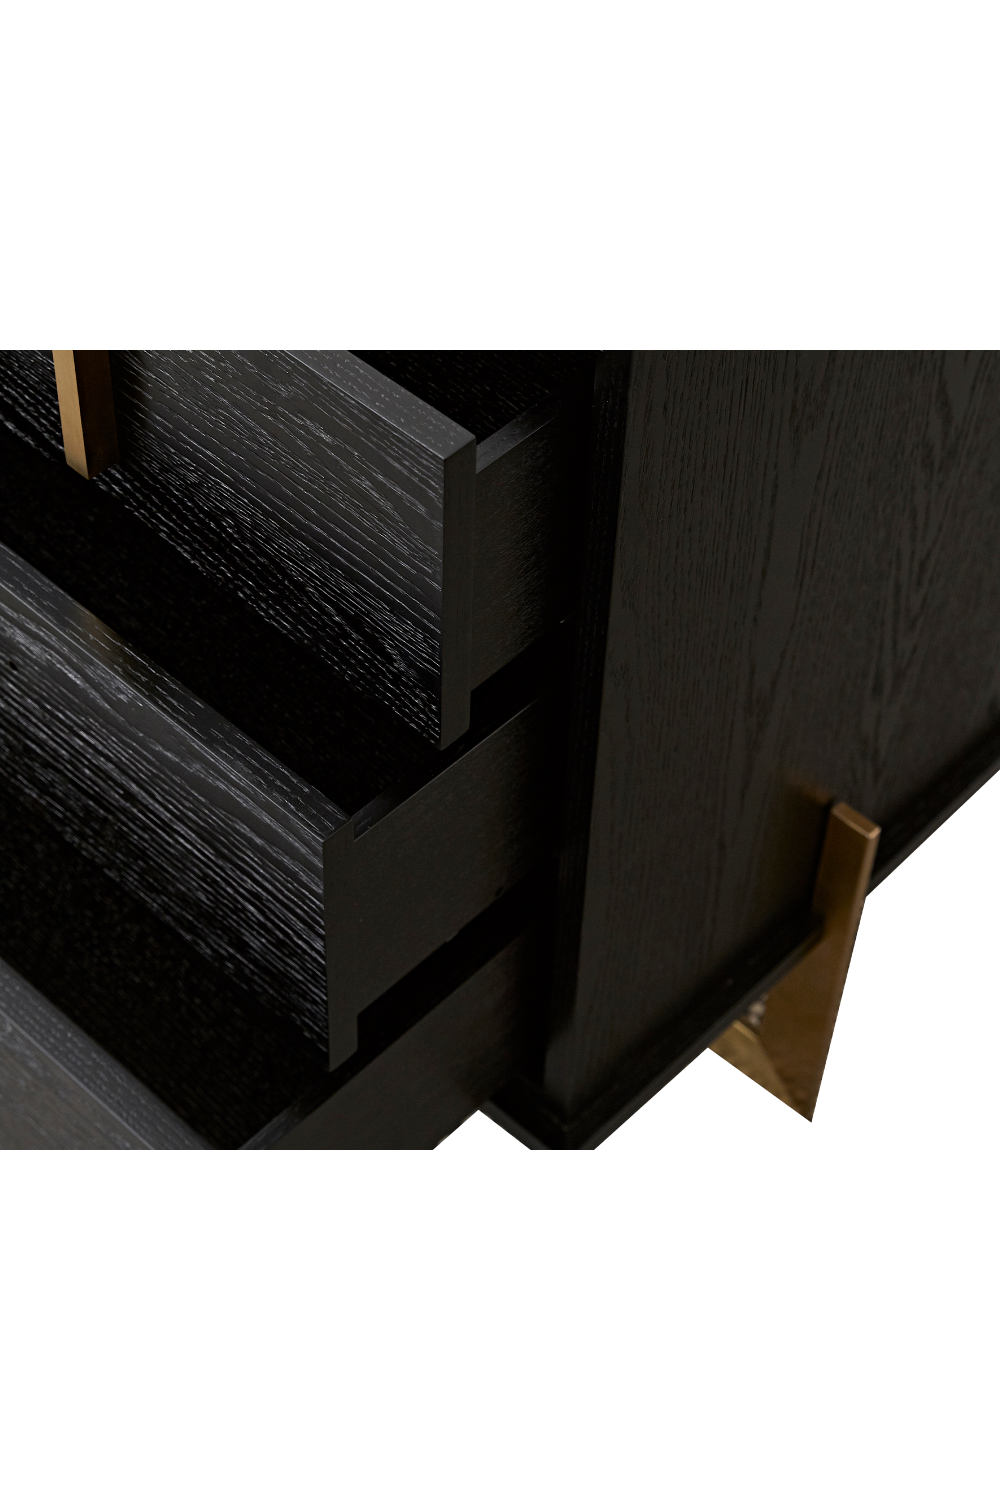 Black Ash Chest of Drawers | Liang & Eimil Archivolto | OROA